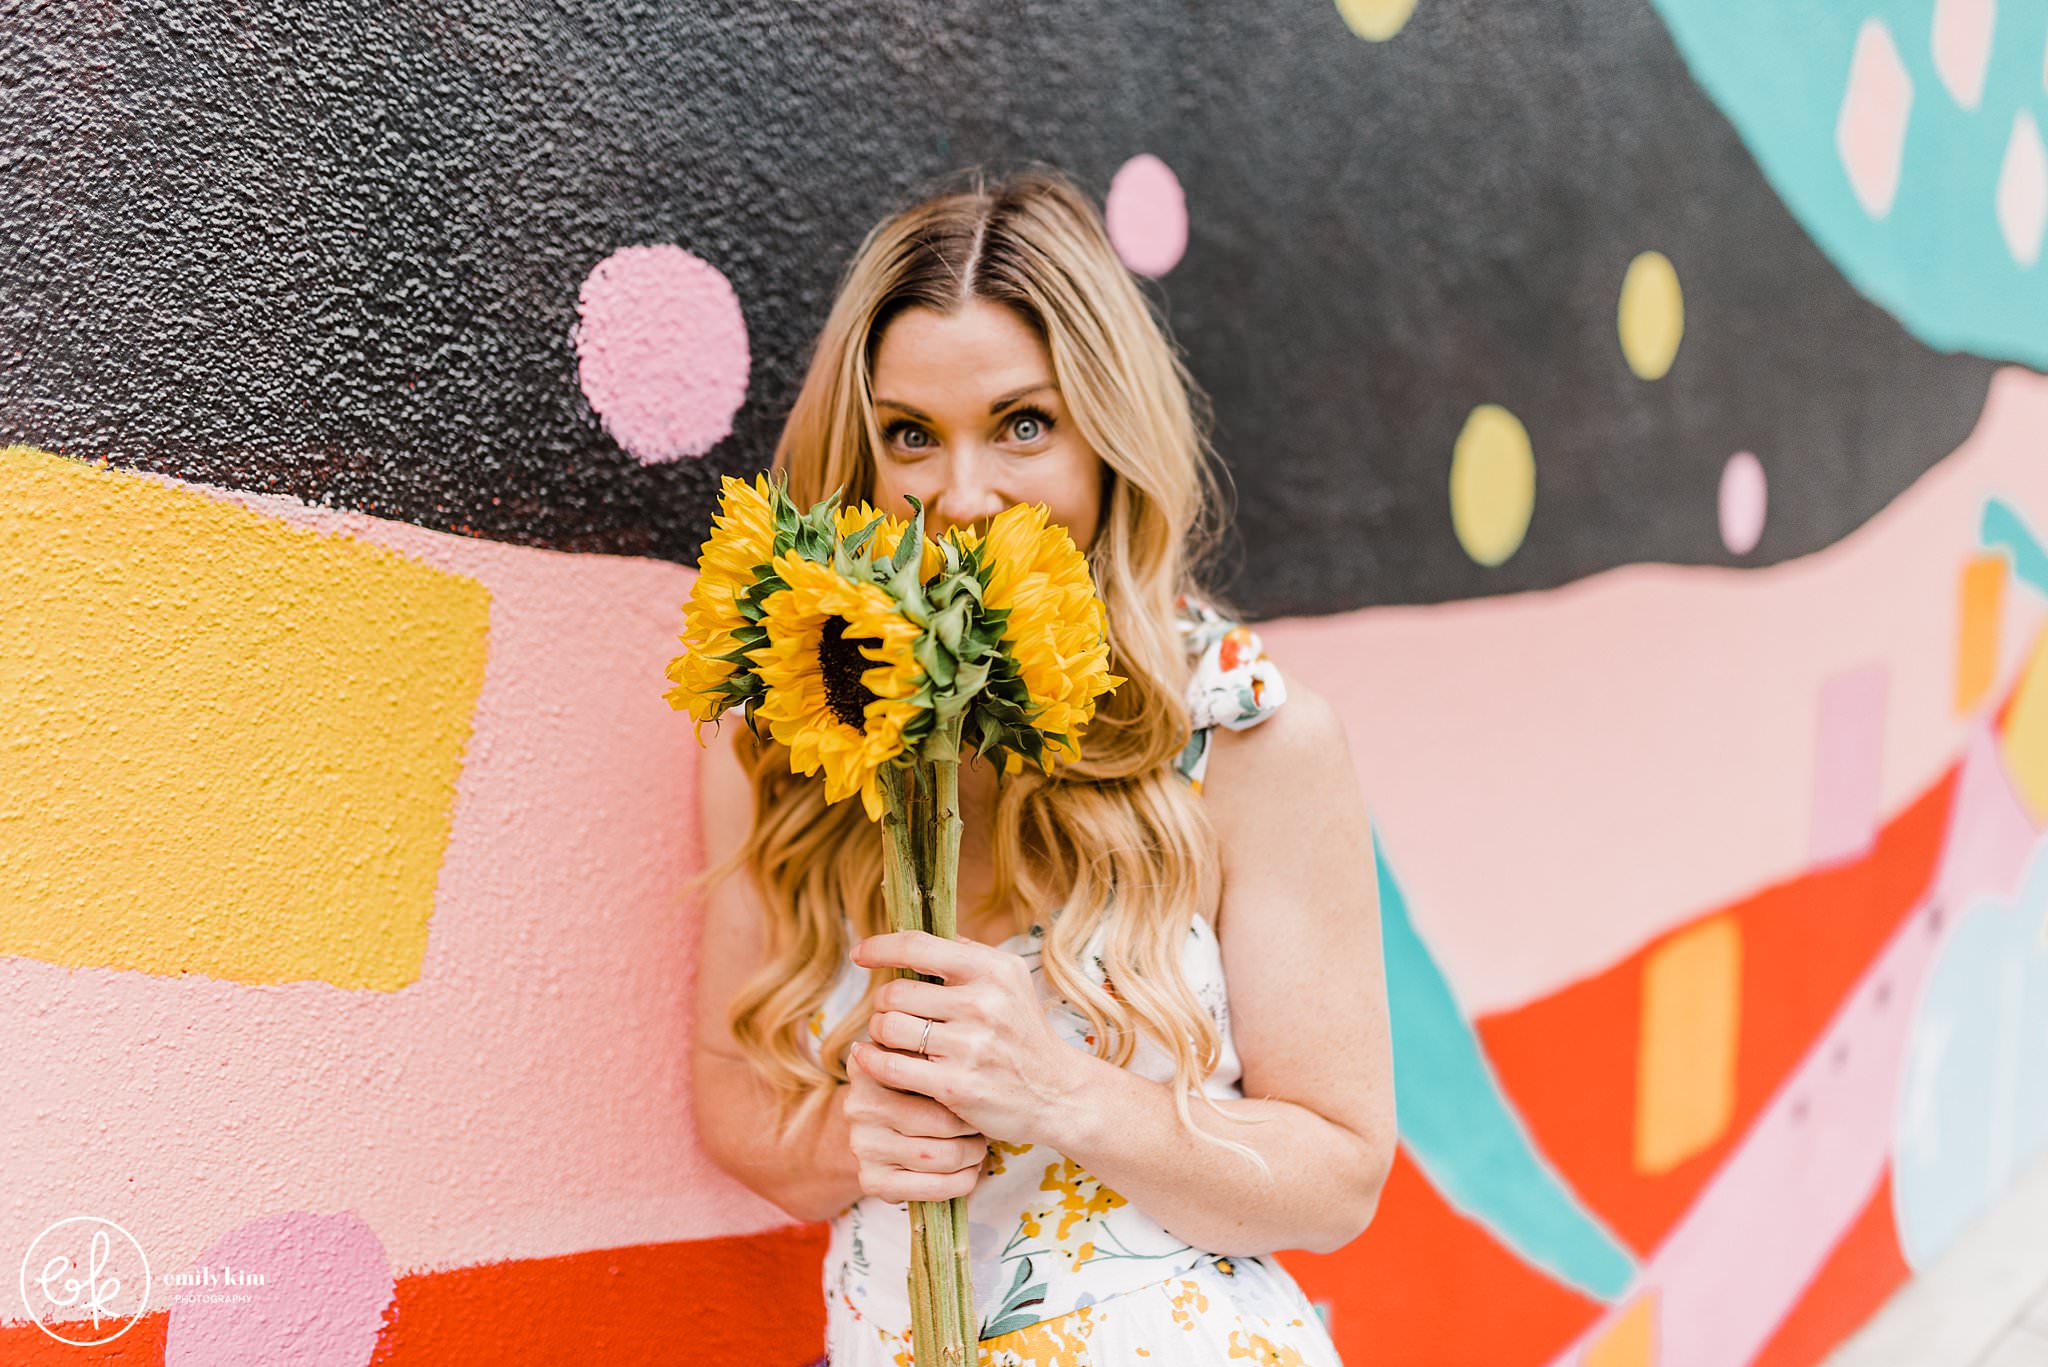 Use sunflowers or a bouquet as props during your photoshoot.